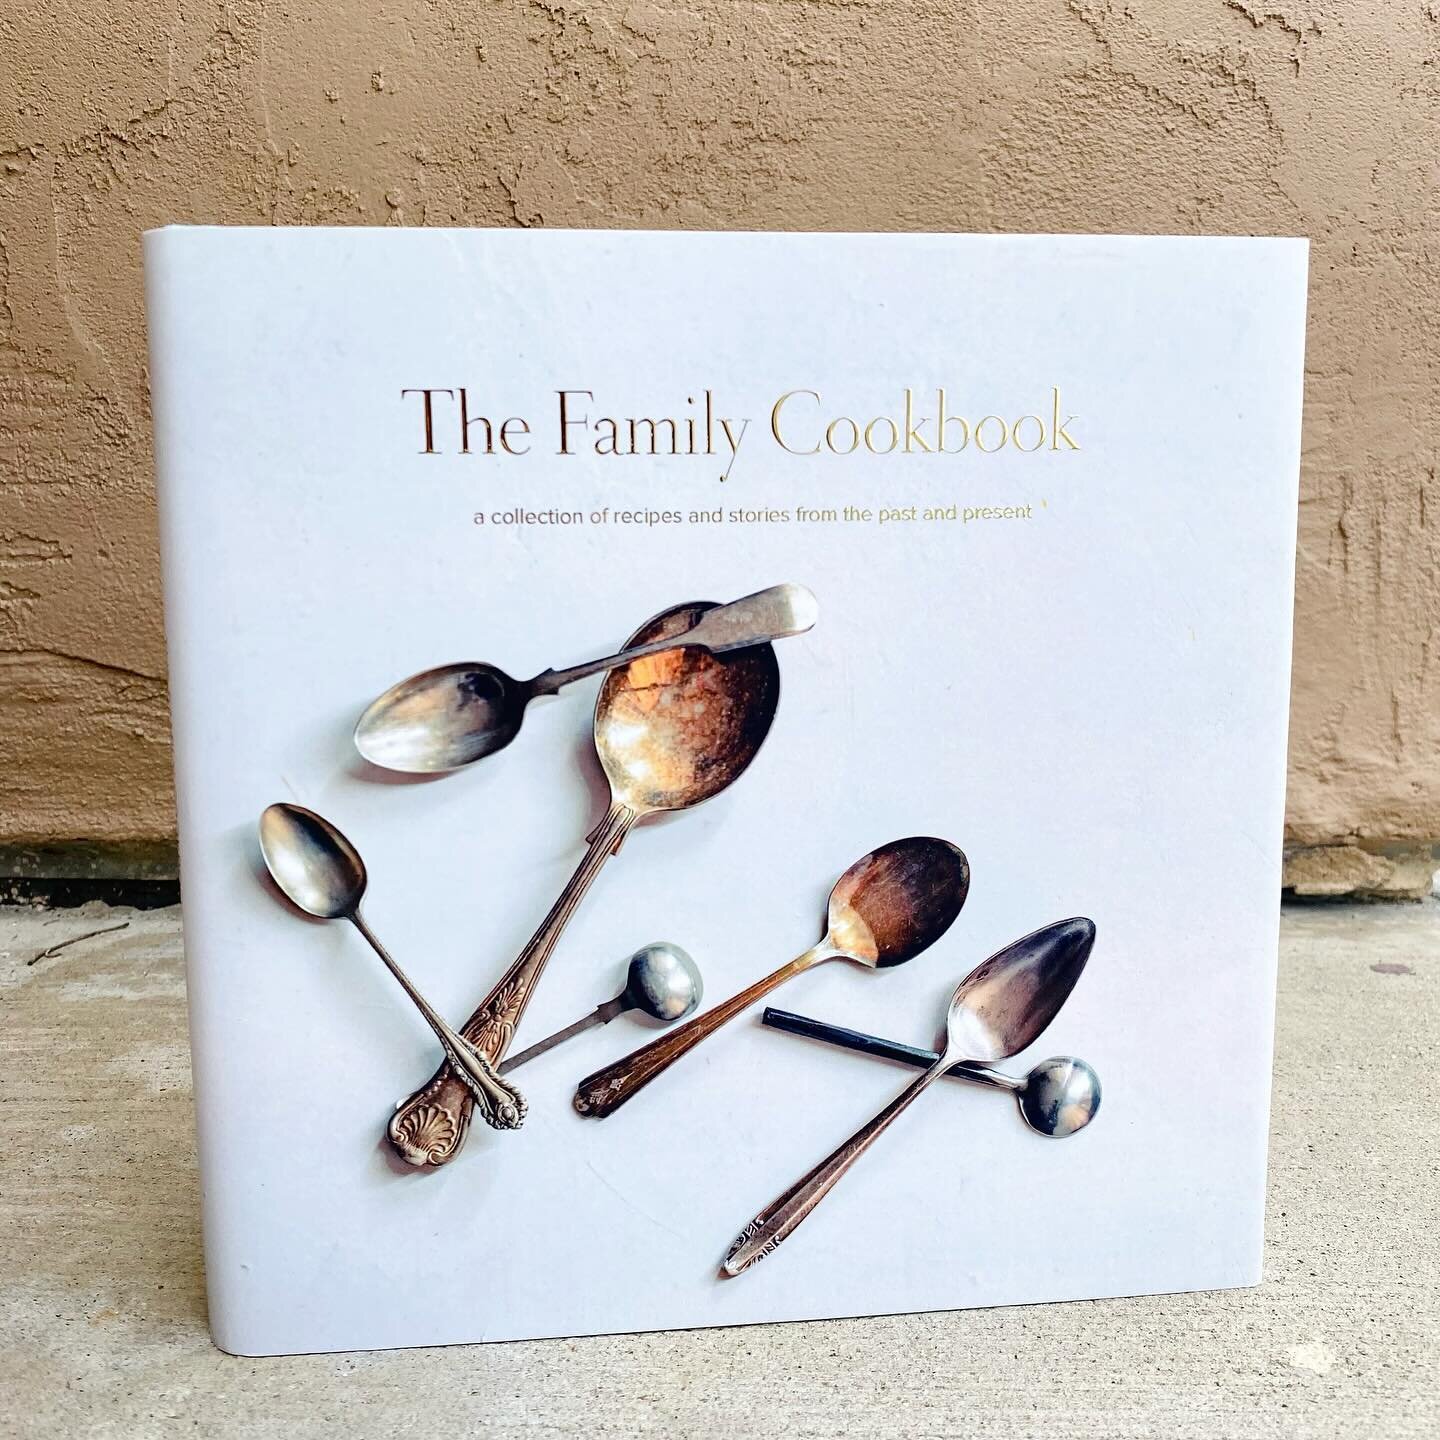 The Family Cookbook: a collection of recipes and stories from the past and present :) 

Printed by @artifactuprising for my parents&rsquo; Christmas gift. That gold foil is 🔥swipe to see the inside 💕

#cookbook #bookcoverdesign #coverdesigner #nonf